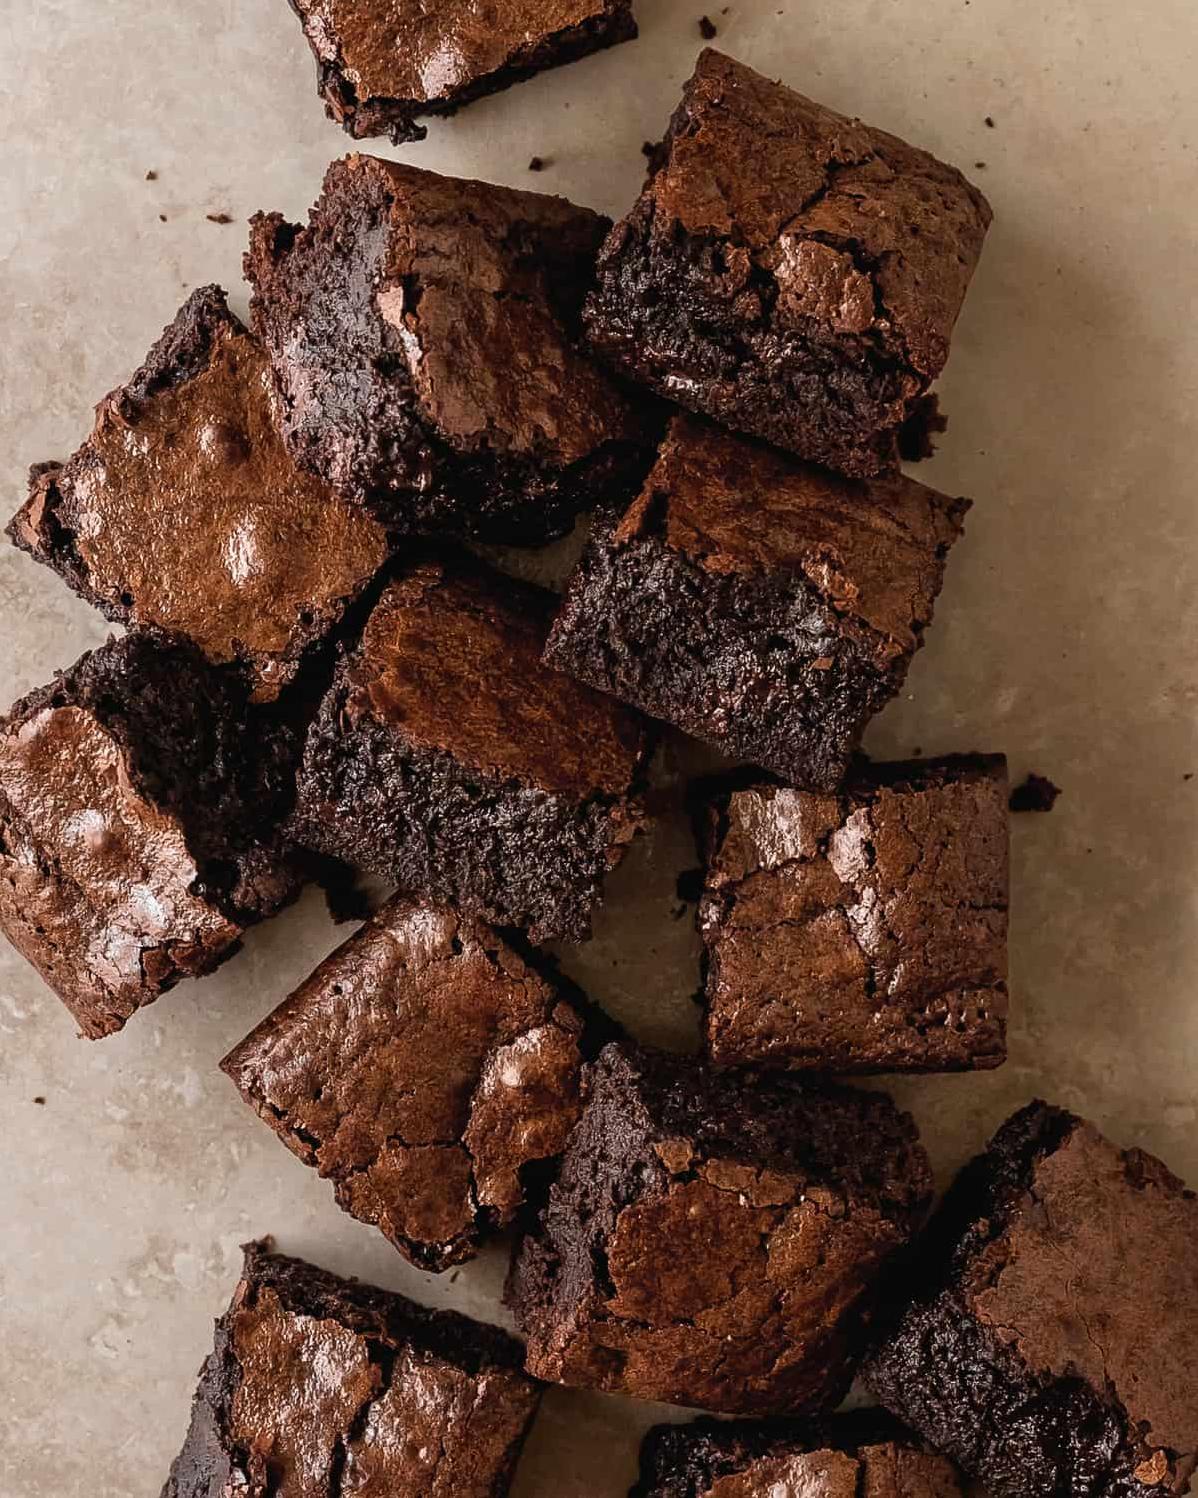  A match made in heaven - chocolate and espresso, in a brownie!